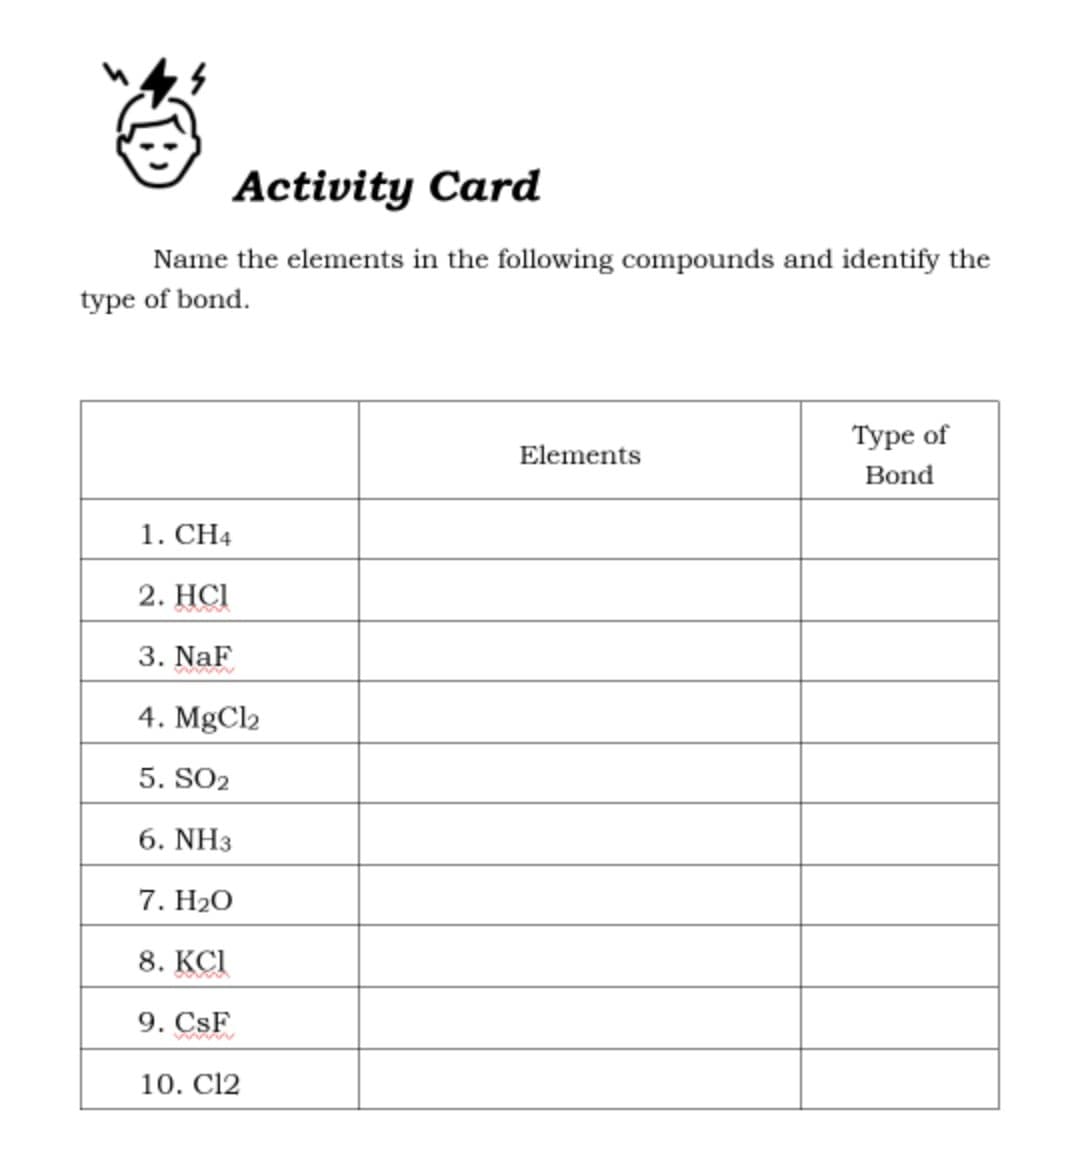 Activity Card
Name the elements in the following compounds and identify the
type of bond.
Туре of
Elements
Bond
1. CH4
2. HCI
3. NaF
4. MgCl2
5. SO2
6. NH3
7. H2О
8. КСІ
9. CsF
10. Cl2
